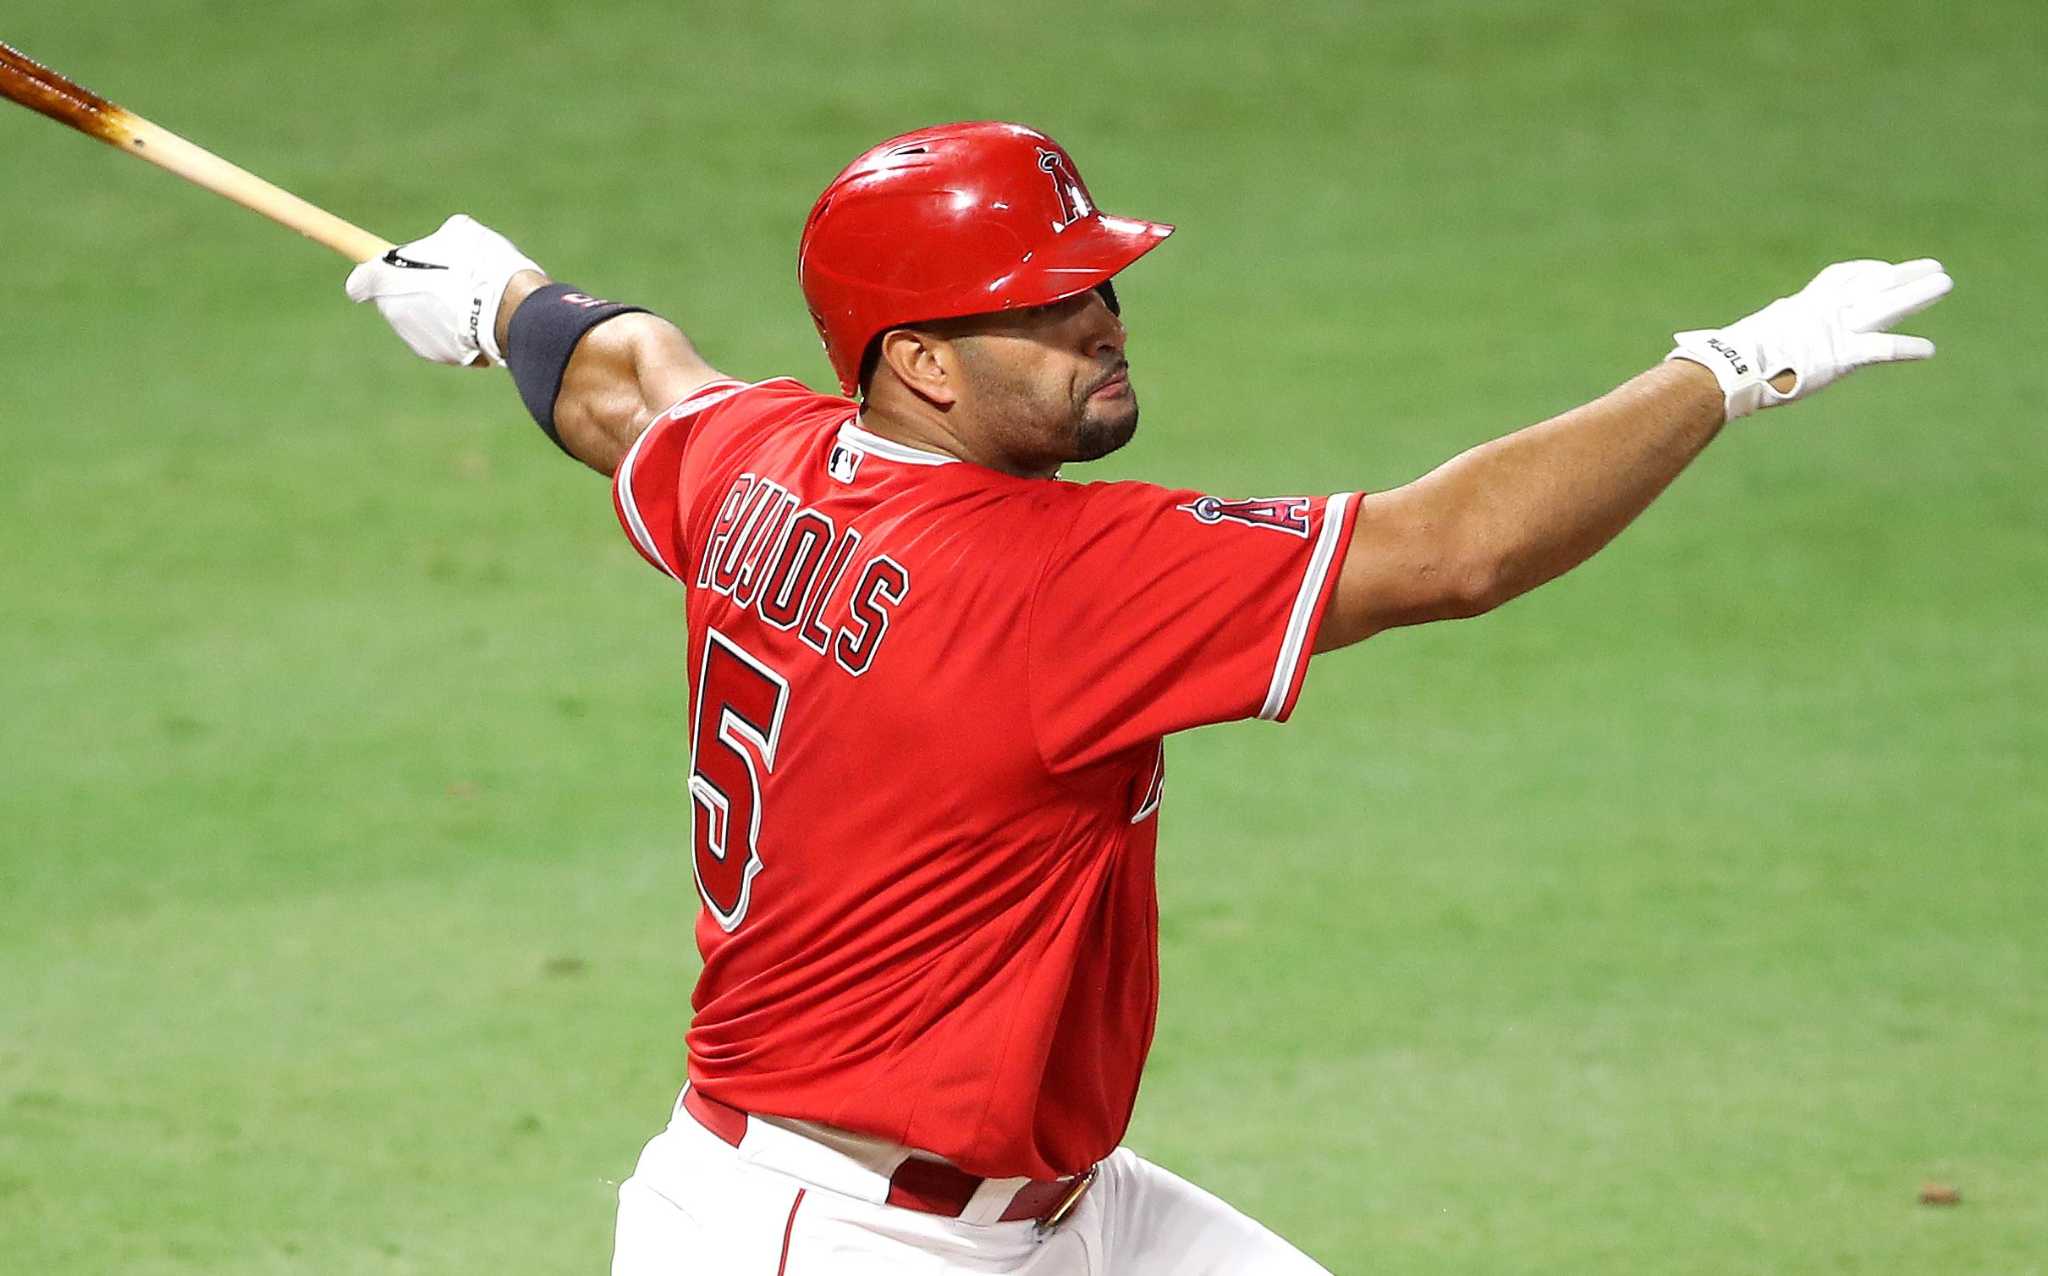 On deck: Angels at Astros